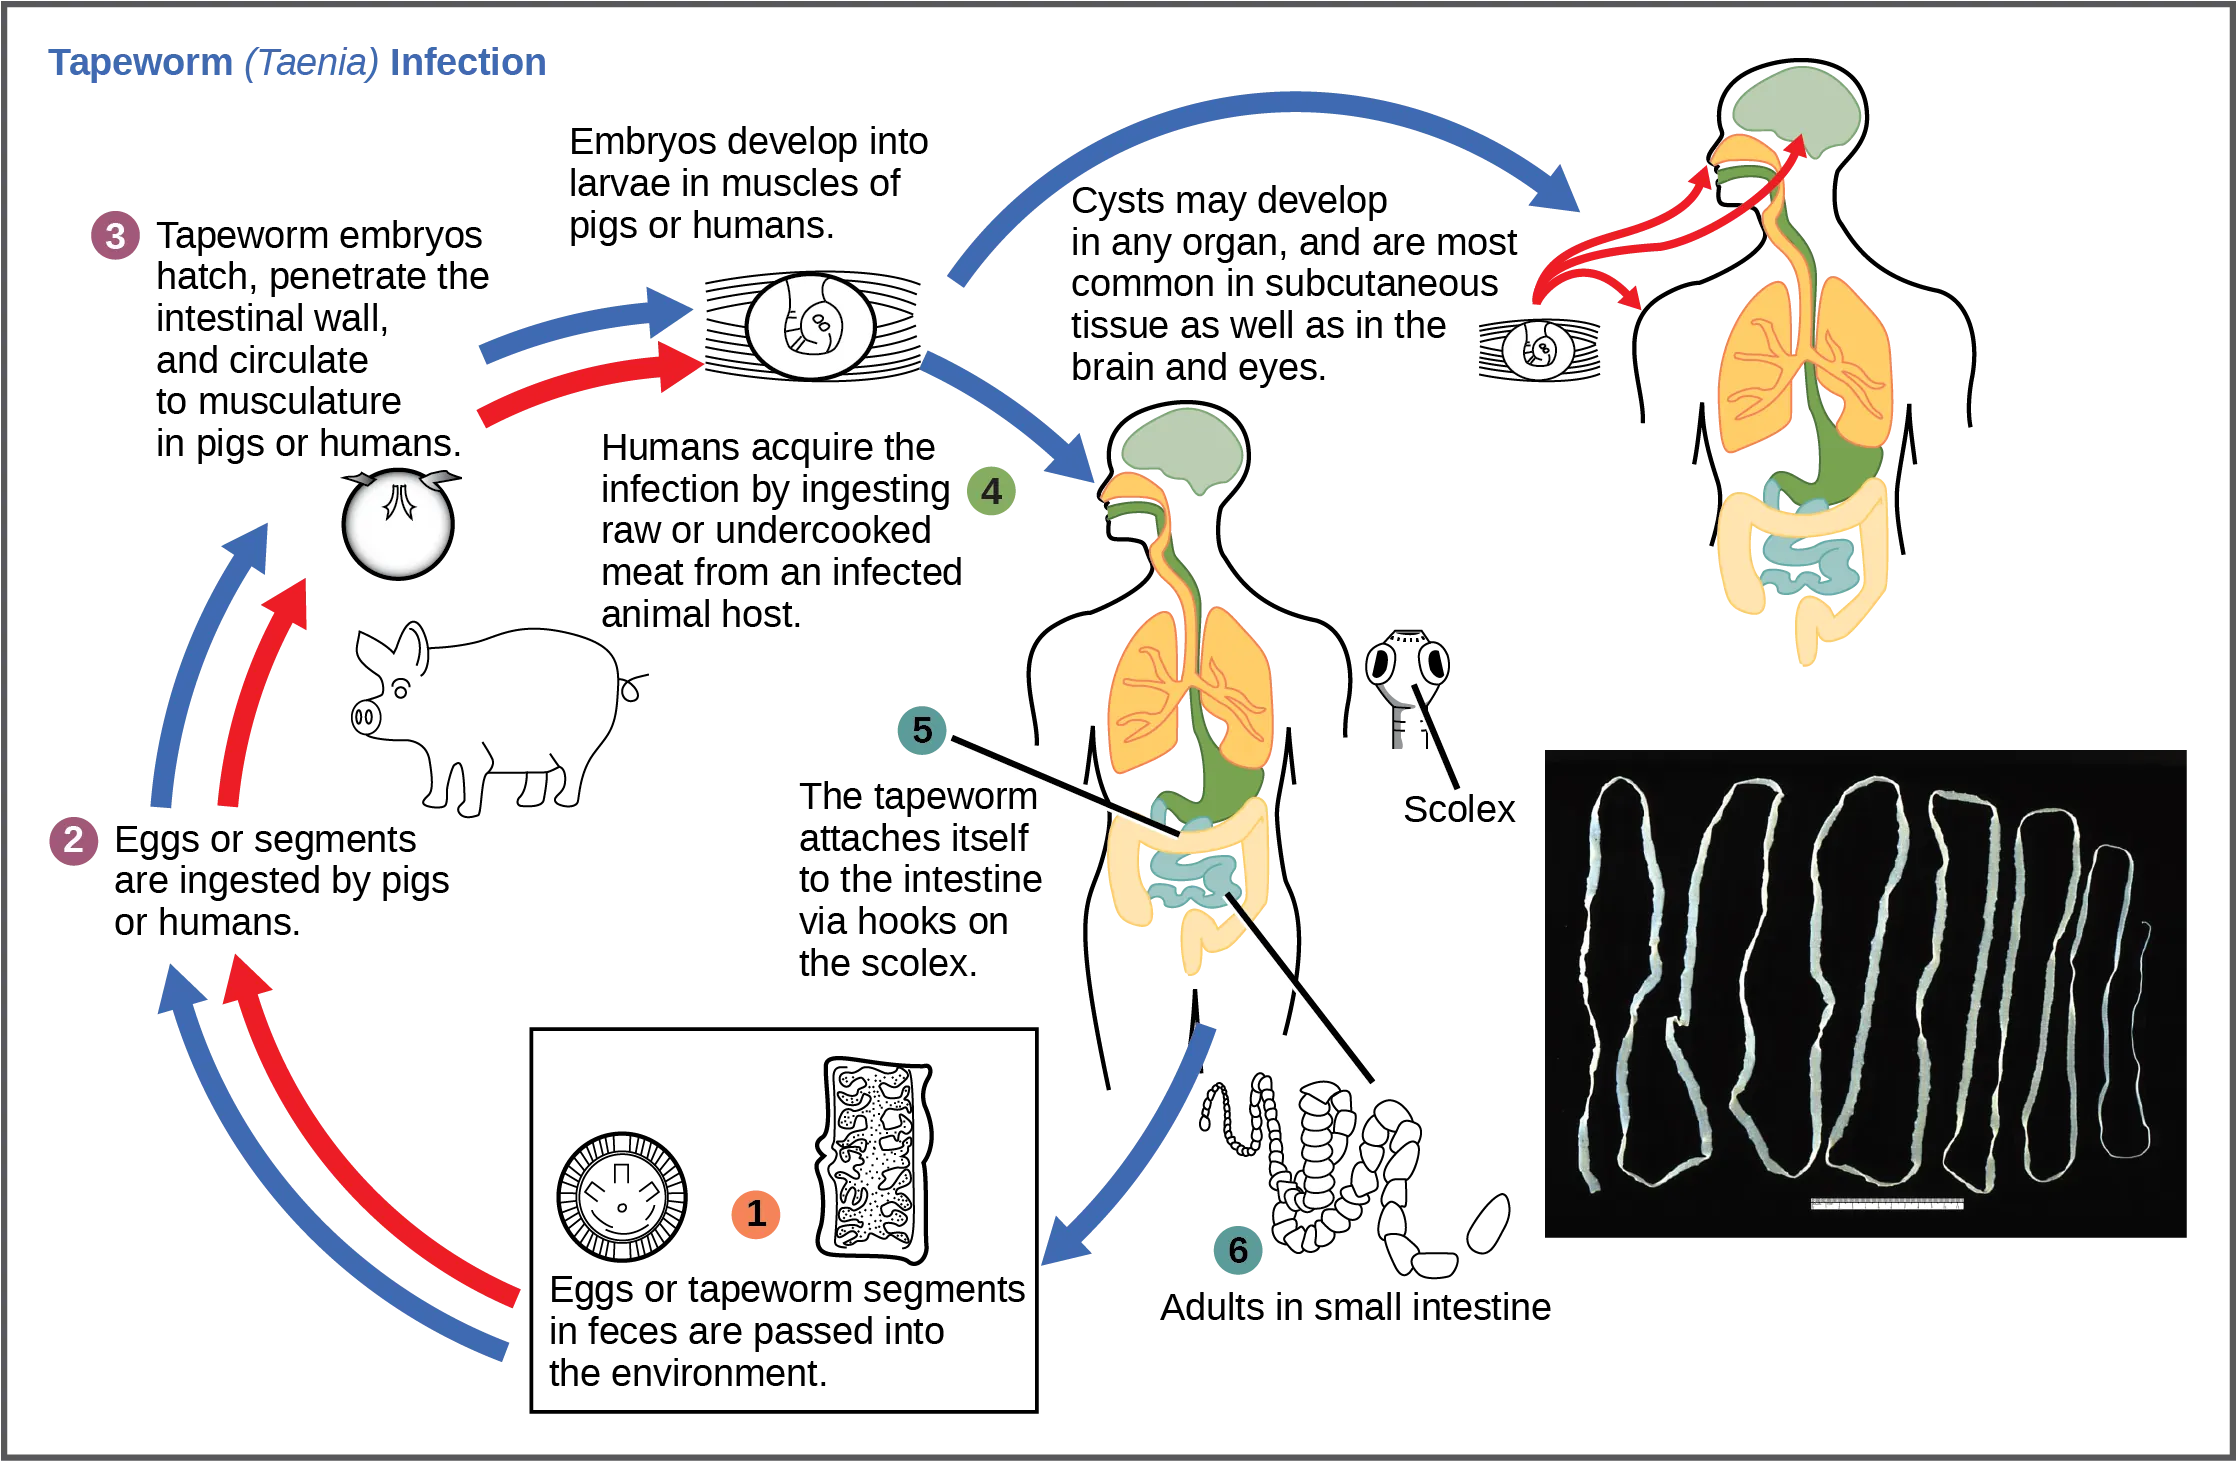 The life cycle of a tapeworm begins when eggs or tapeworm segments in the feces are ingested by pigs or humans. The embryos hatch, penetrate the intestinal wall, and circulate to the musculature in both pigs and humans. Humans may acquire a tapeworm infection by ingesting raw or undercooked meat. Infection may results in cysts in the musculature, or in tapeworms in the intestine. Tapeworms attach themselves to the intestine via a hook-like structure called the scolex. Tapeworm segments and eggs are excreted in the feces, completing the cycle.